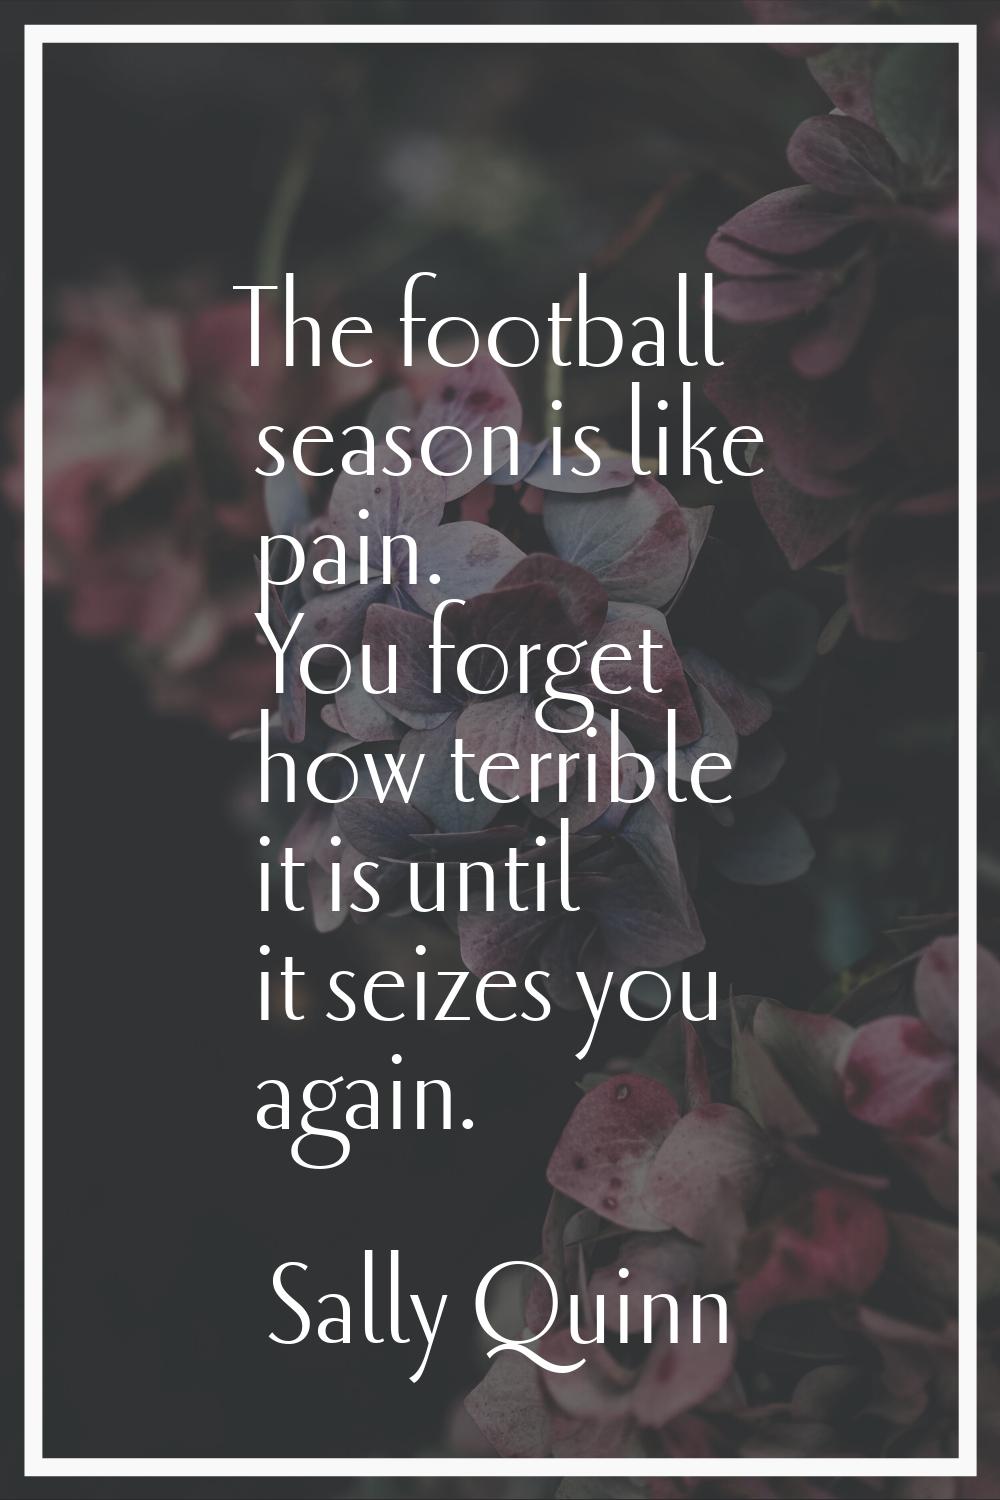 The football season is like pain. You forget how terrible it is until it seizes you again.